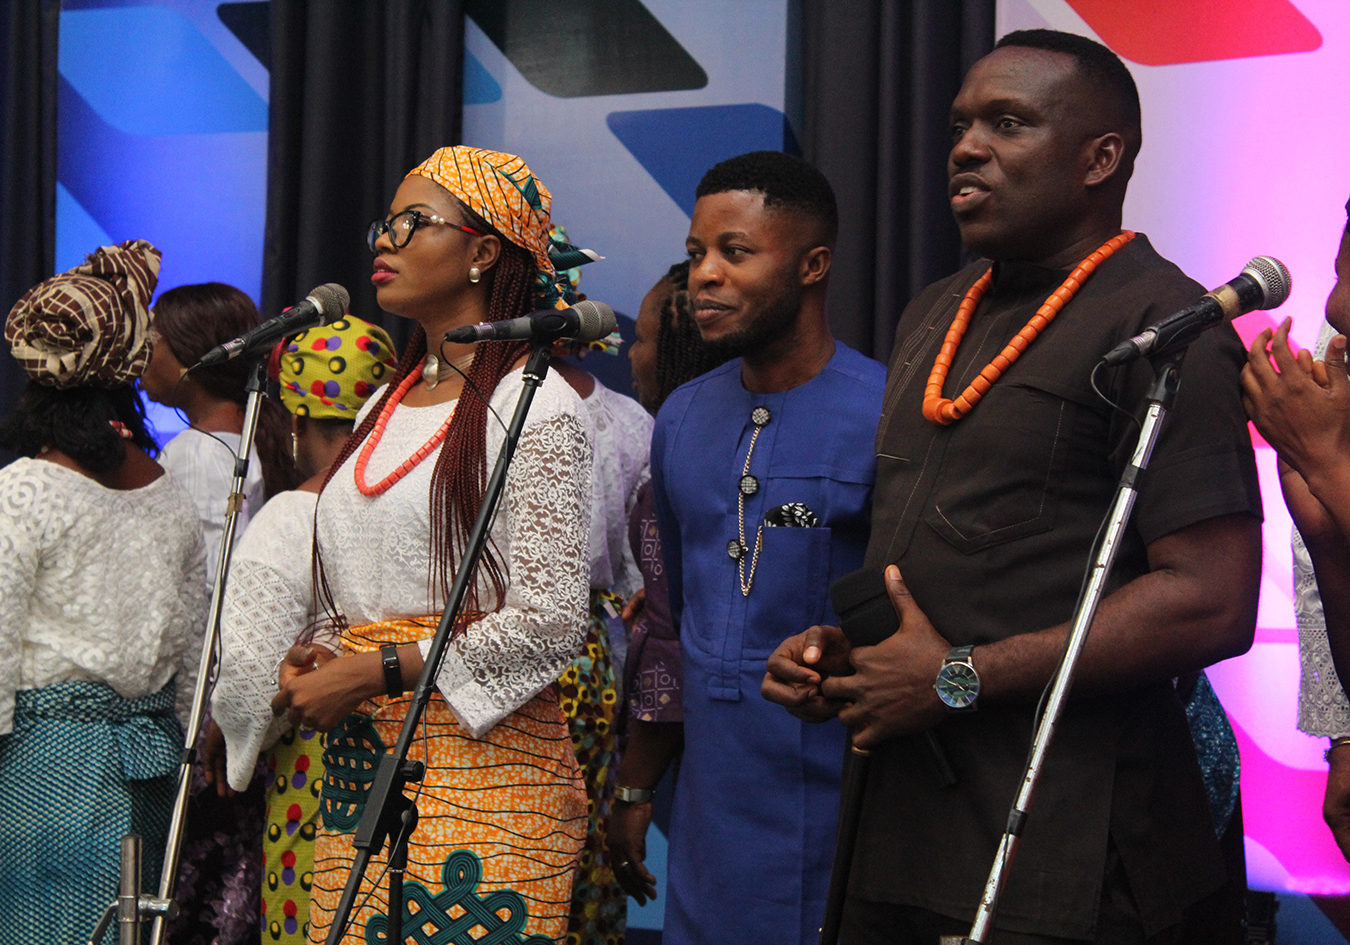 A group of black people in front of microphones. The three people in the foreground are a man wearing black with orange beads, a man wearing blue, and a woman wearing a white top and coloured African print skirt with orange beads and an African print hair wrap.